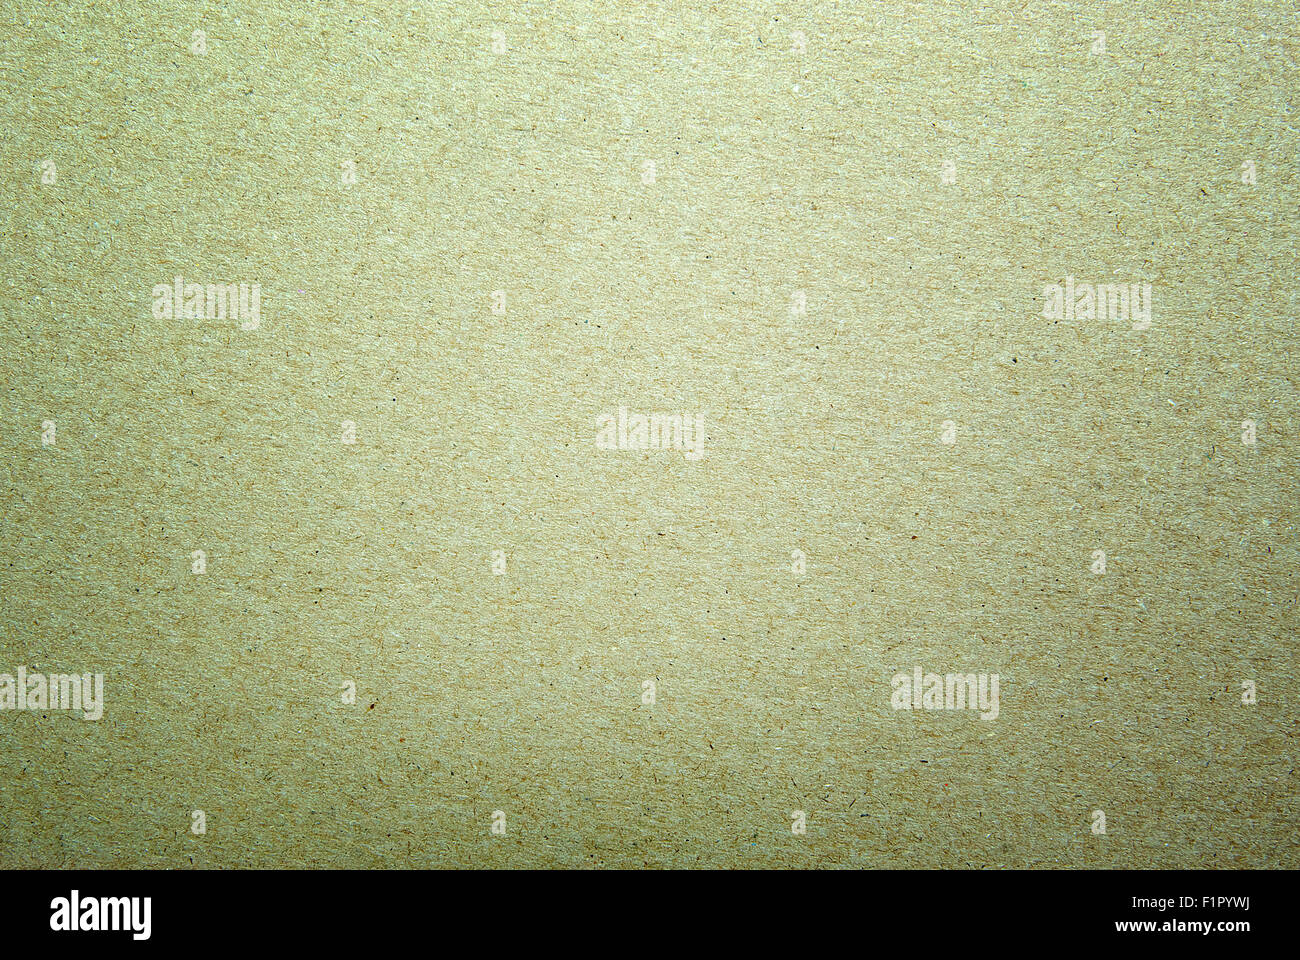 cardboard texture. Old paper texture with glow in the center. Element of design Stock Photo